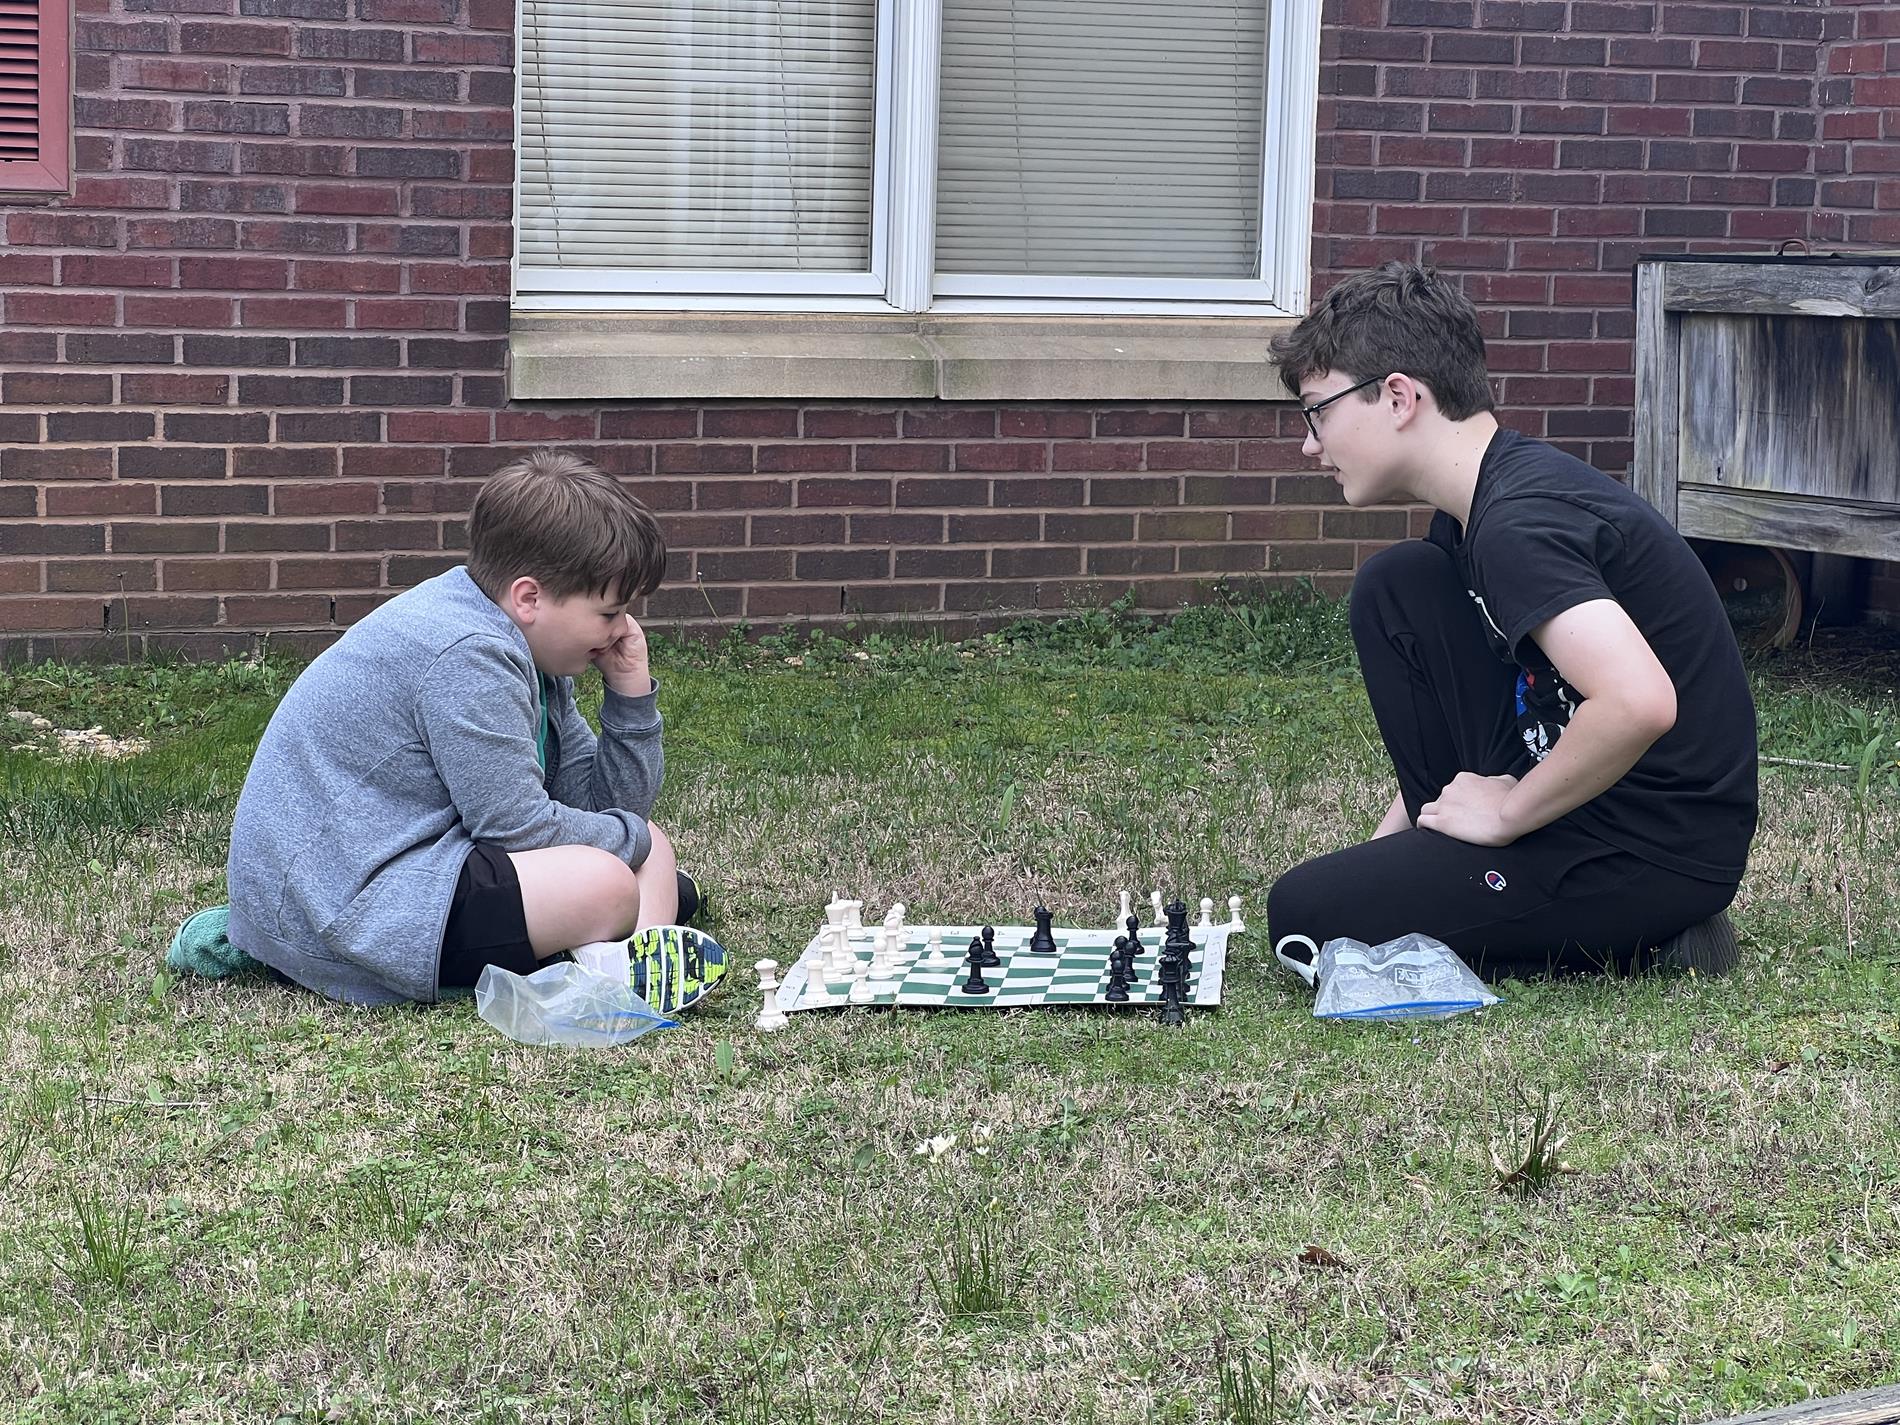 Playing Chess Outdoors